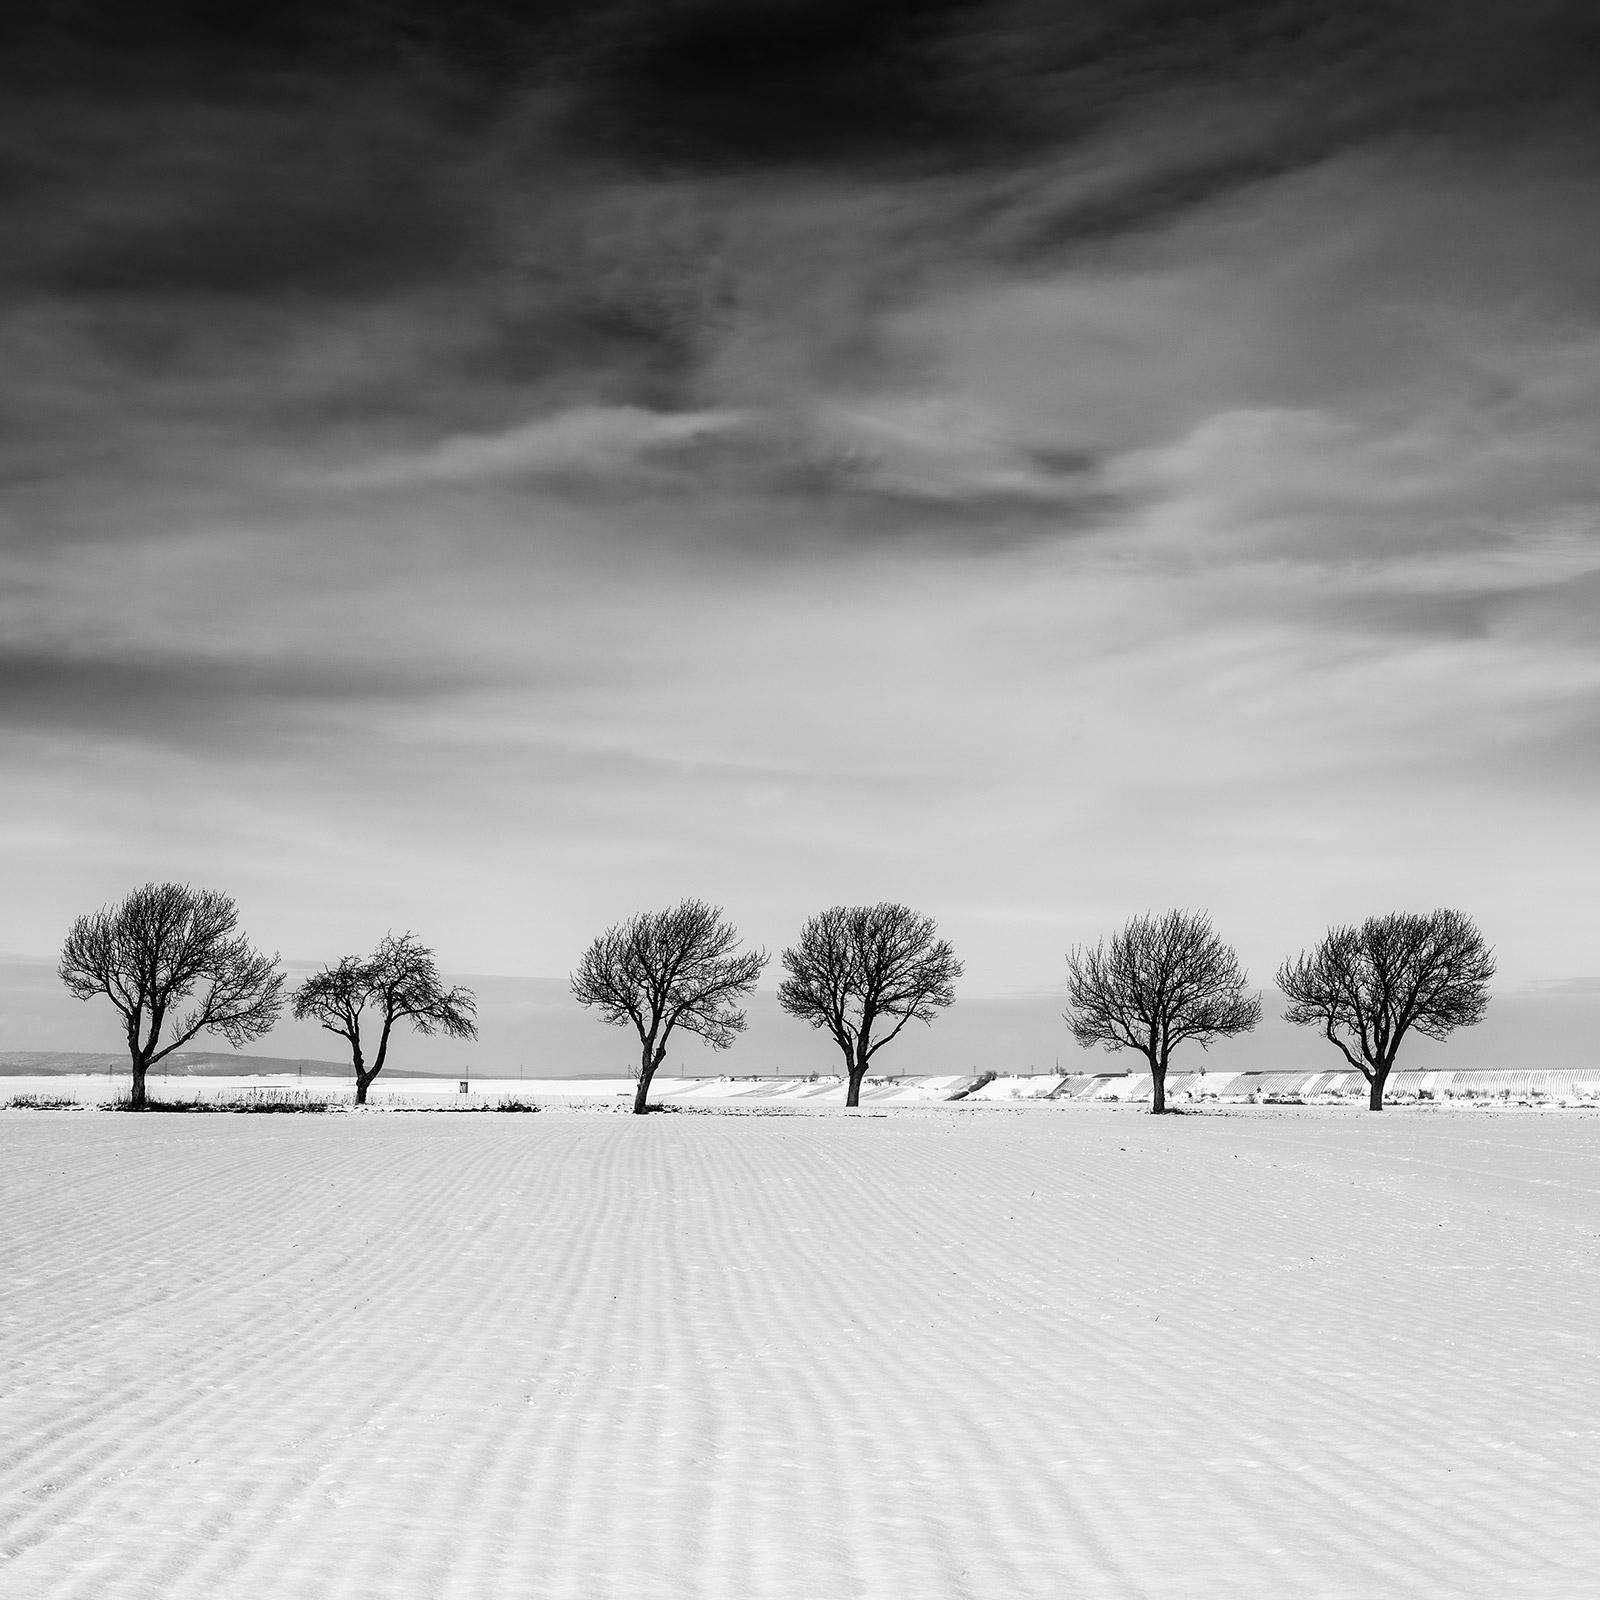 Six Trees in snowy Field, Austria, black and white fineart landscape photography